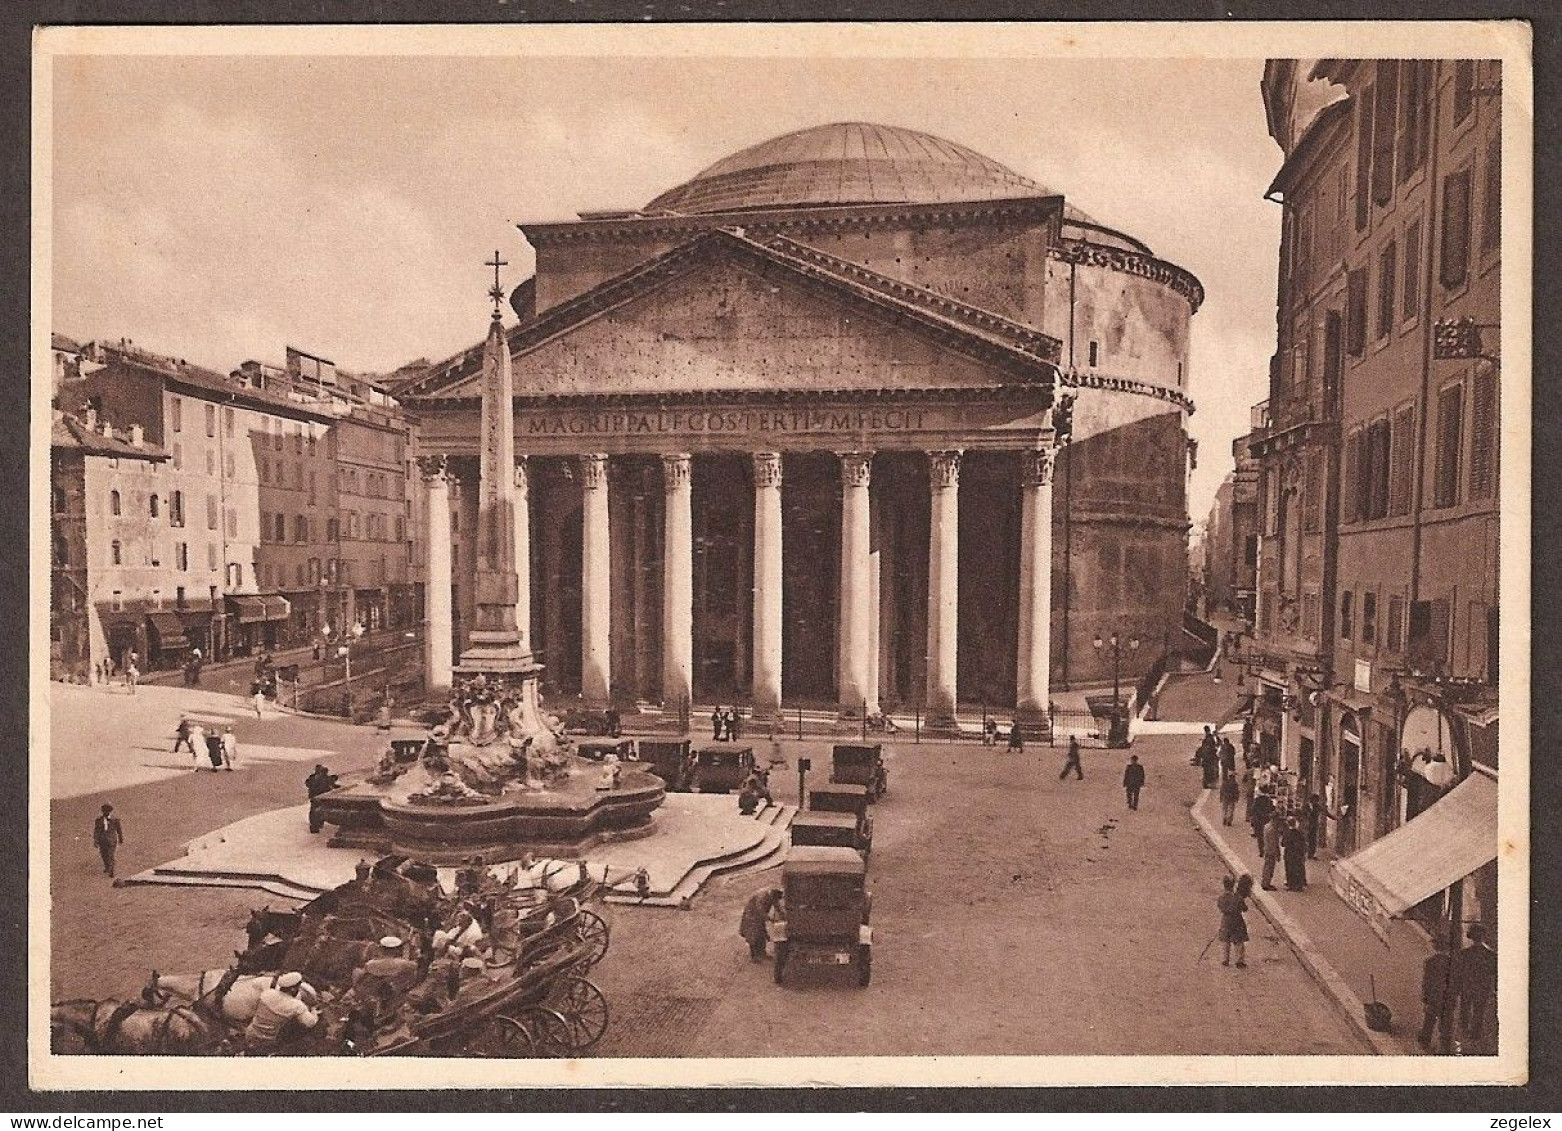 Roma - Pantheon - Carriages, Automobiles Old Timers - Panthéon